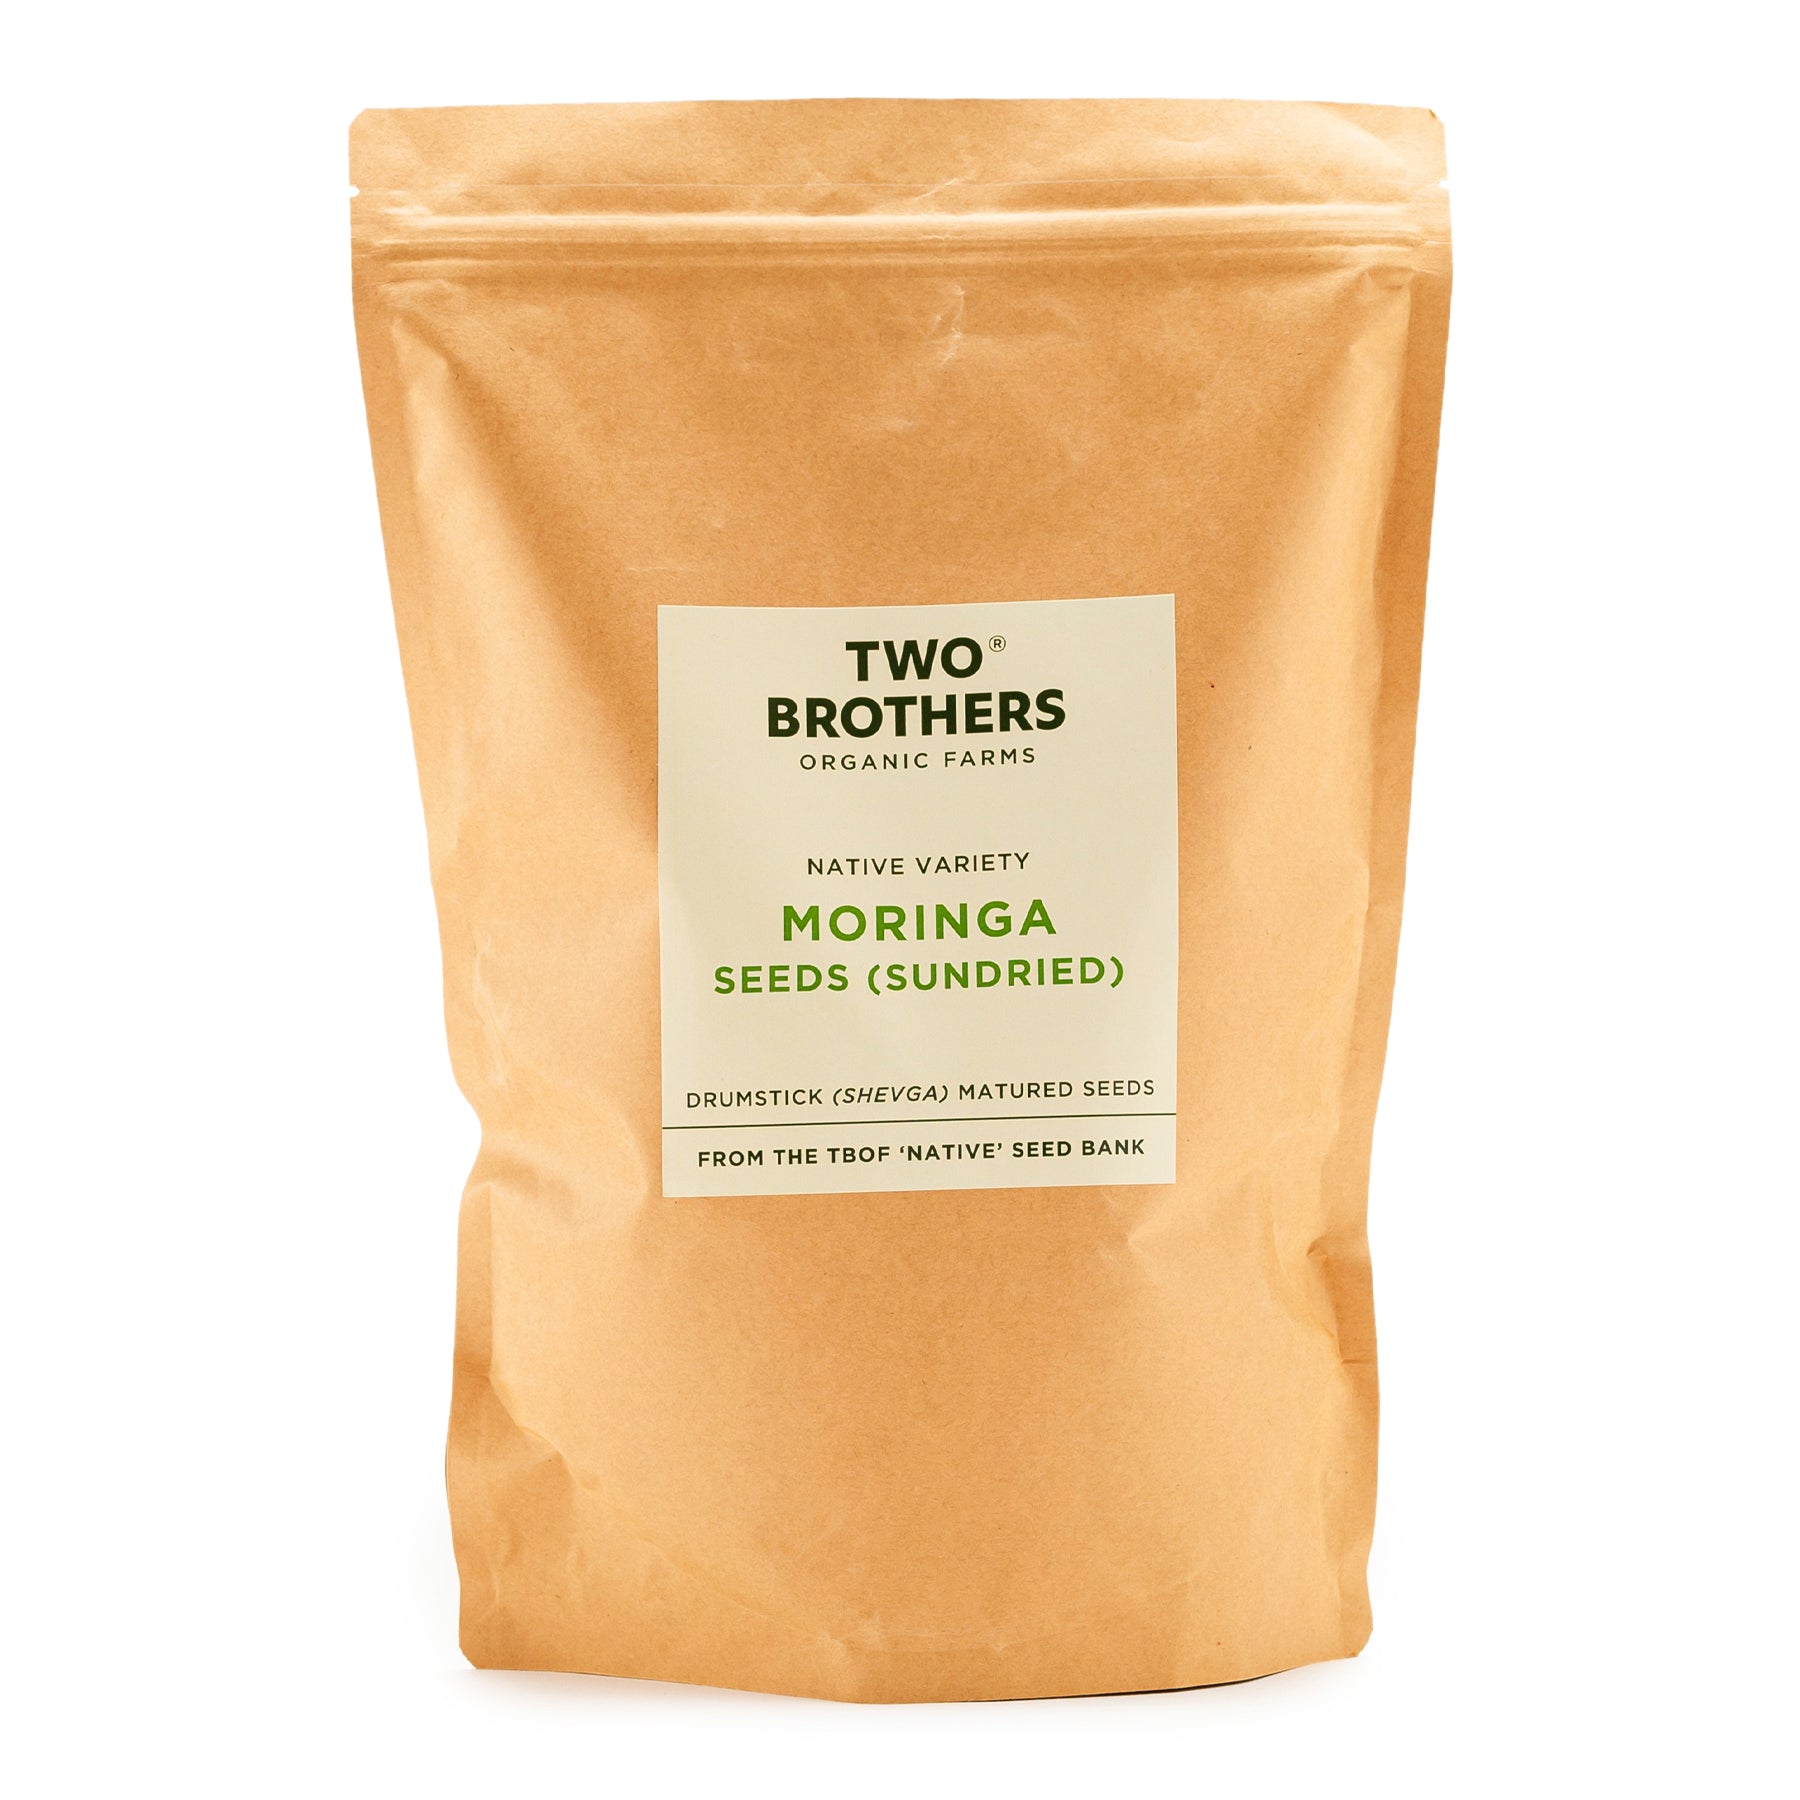 Product: Two Brothers Moringa Drumstick Seeds, 1 Kg